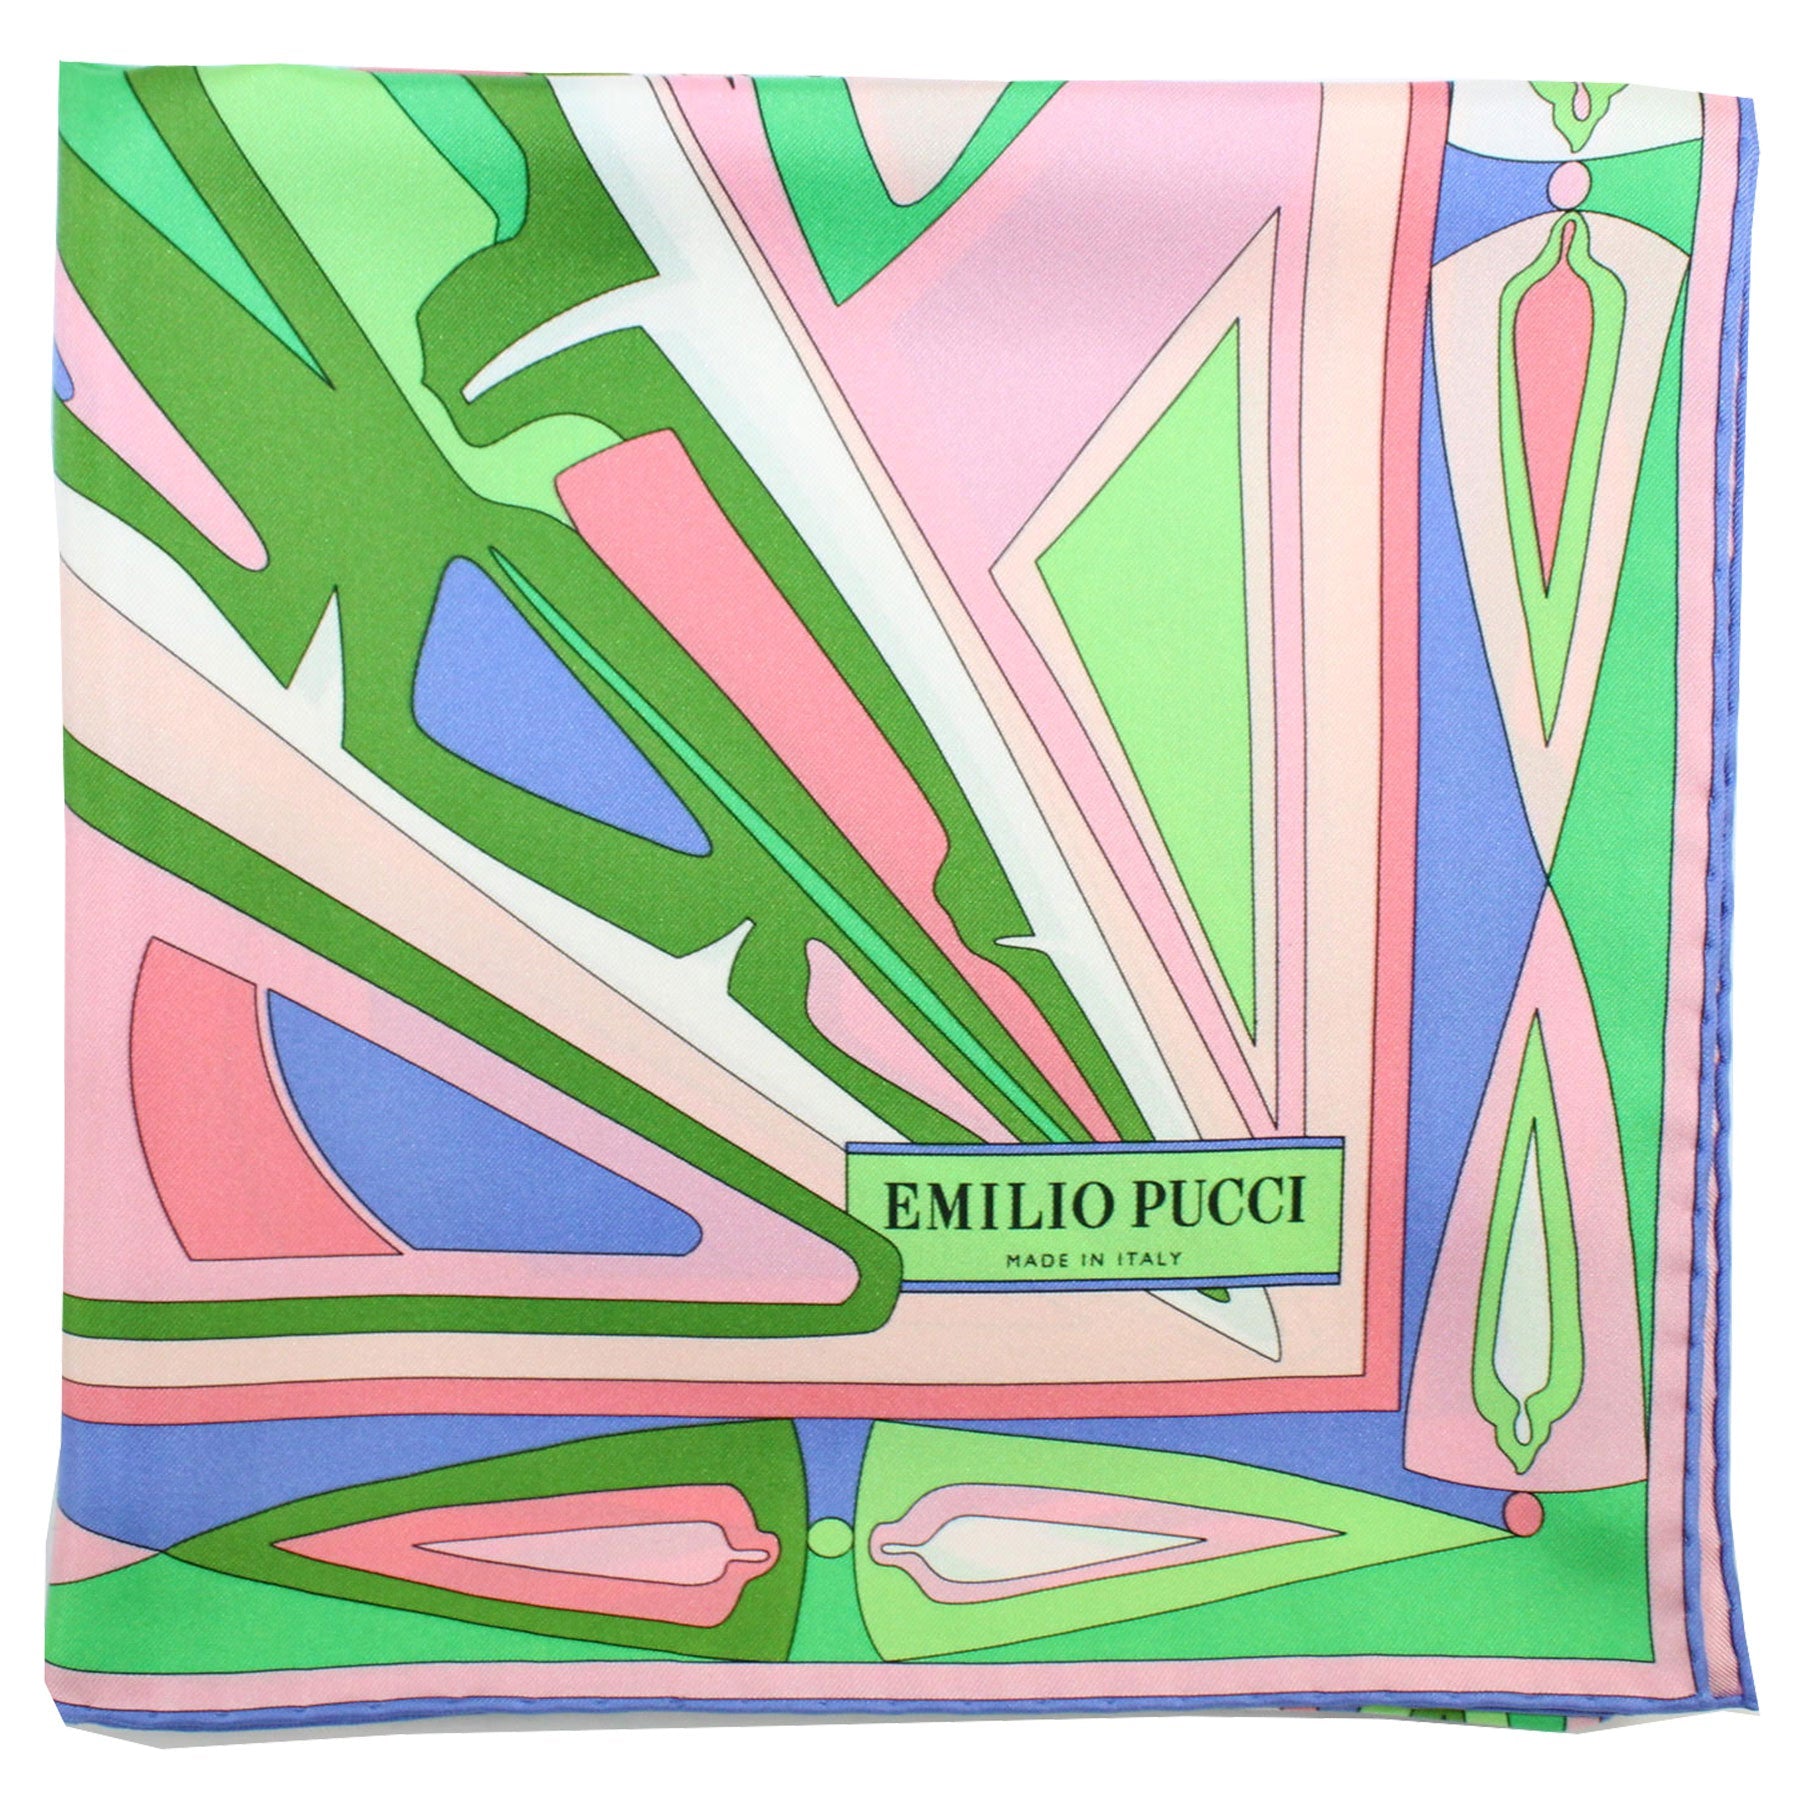 Emilio Pucci Scarf Green Pink Blue Medallions Design - Large Twill Silk Square Scarf